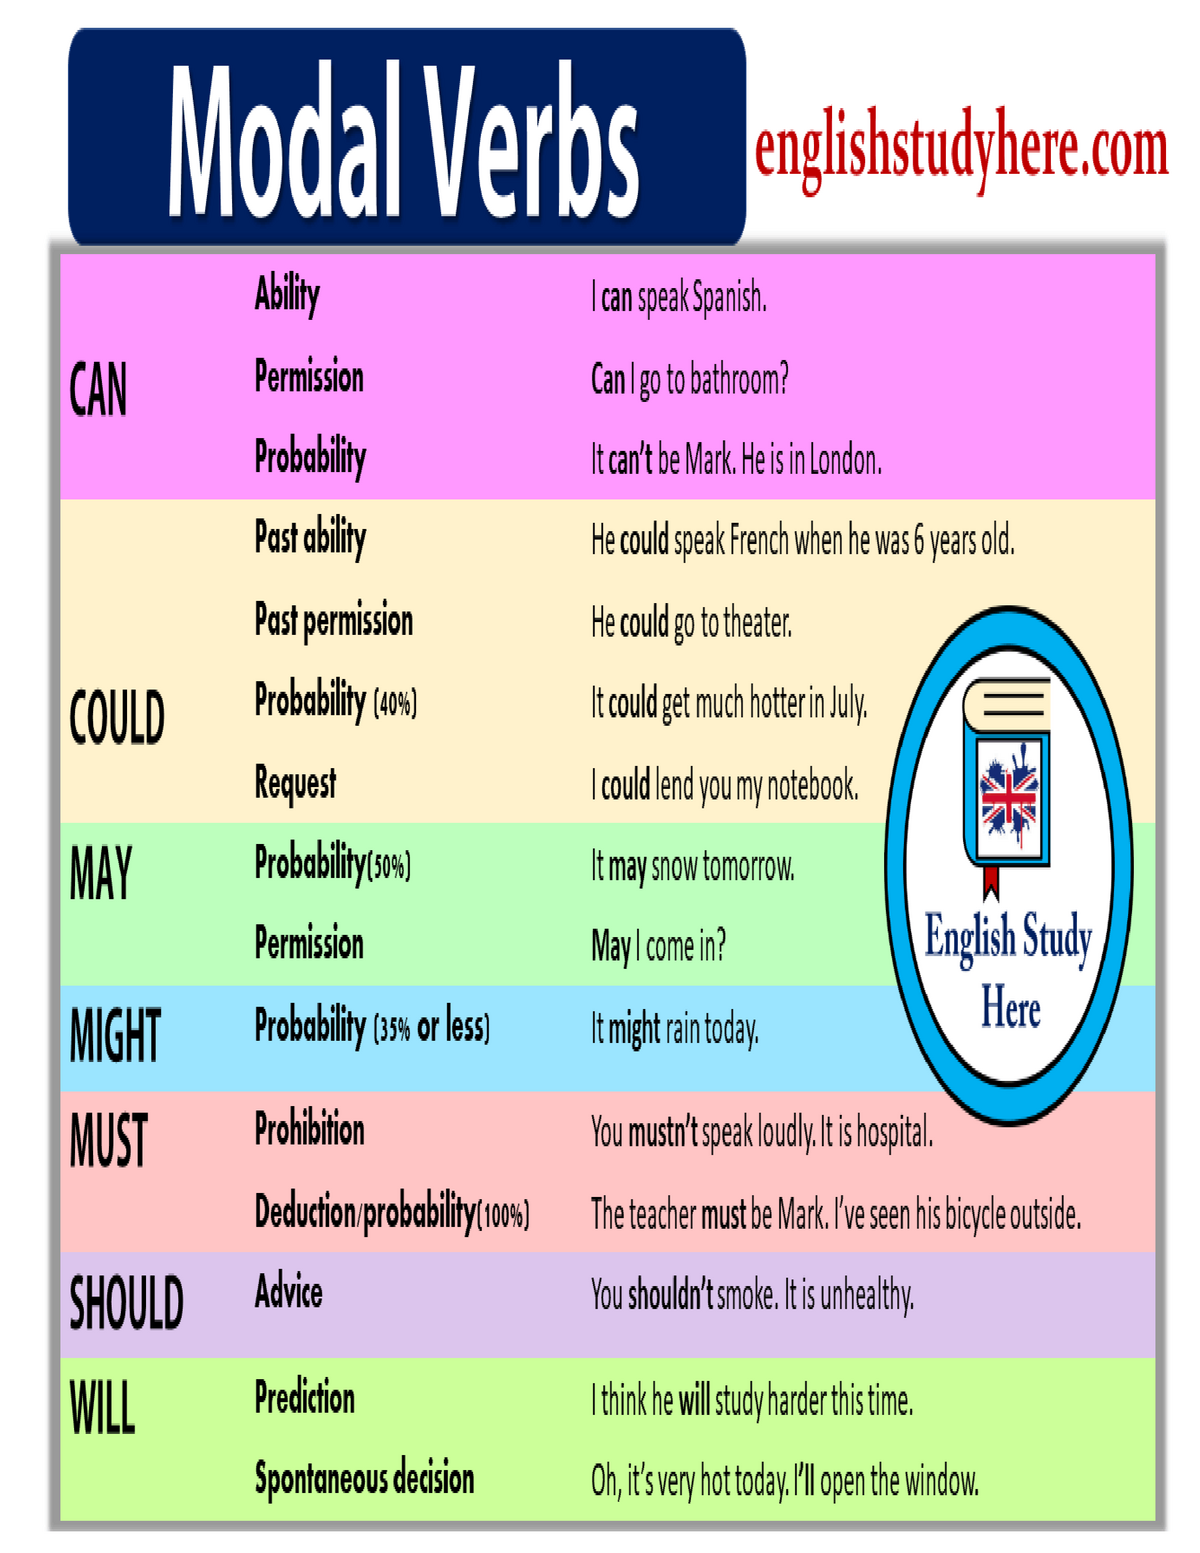 Modal verbs activities and practices - English 1 - Studocu